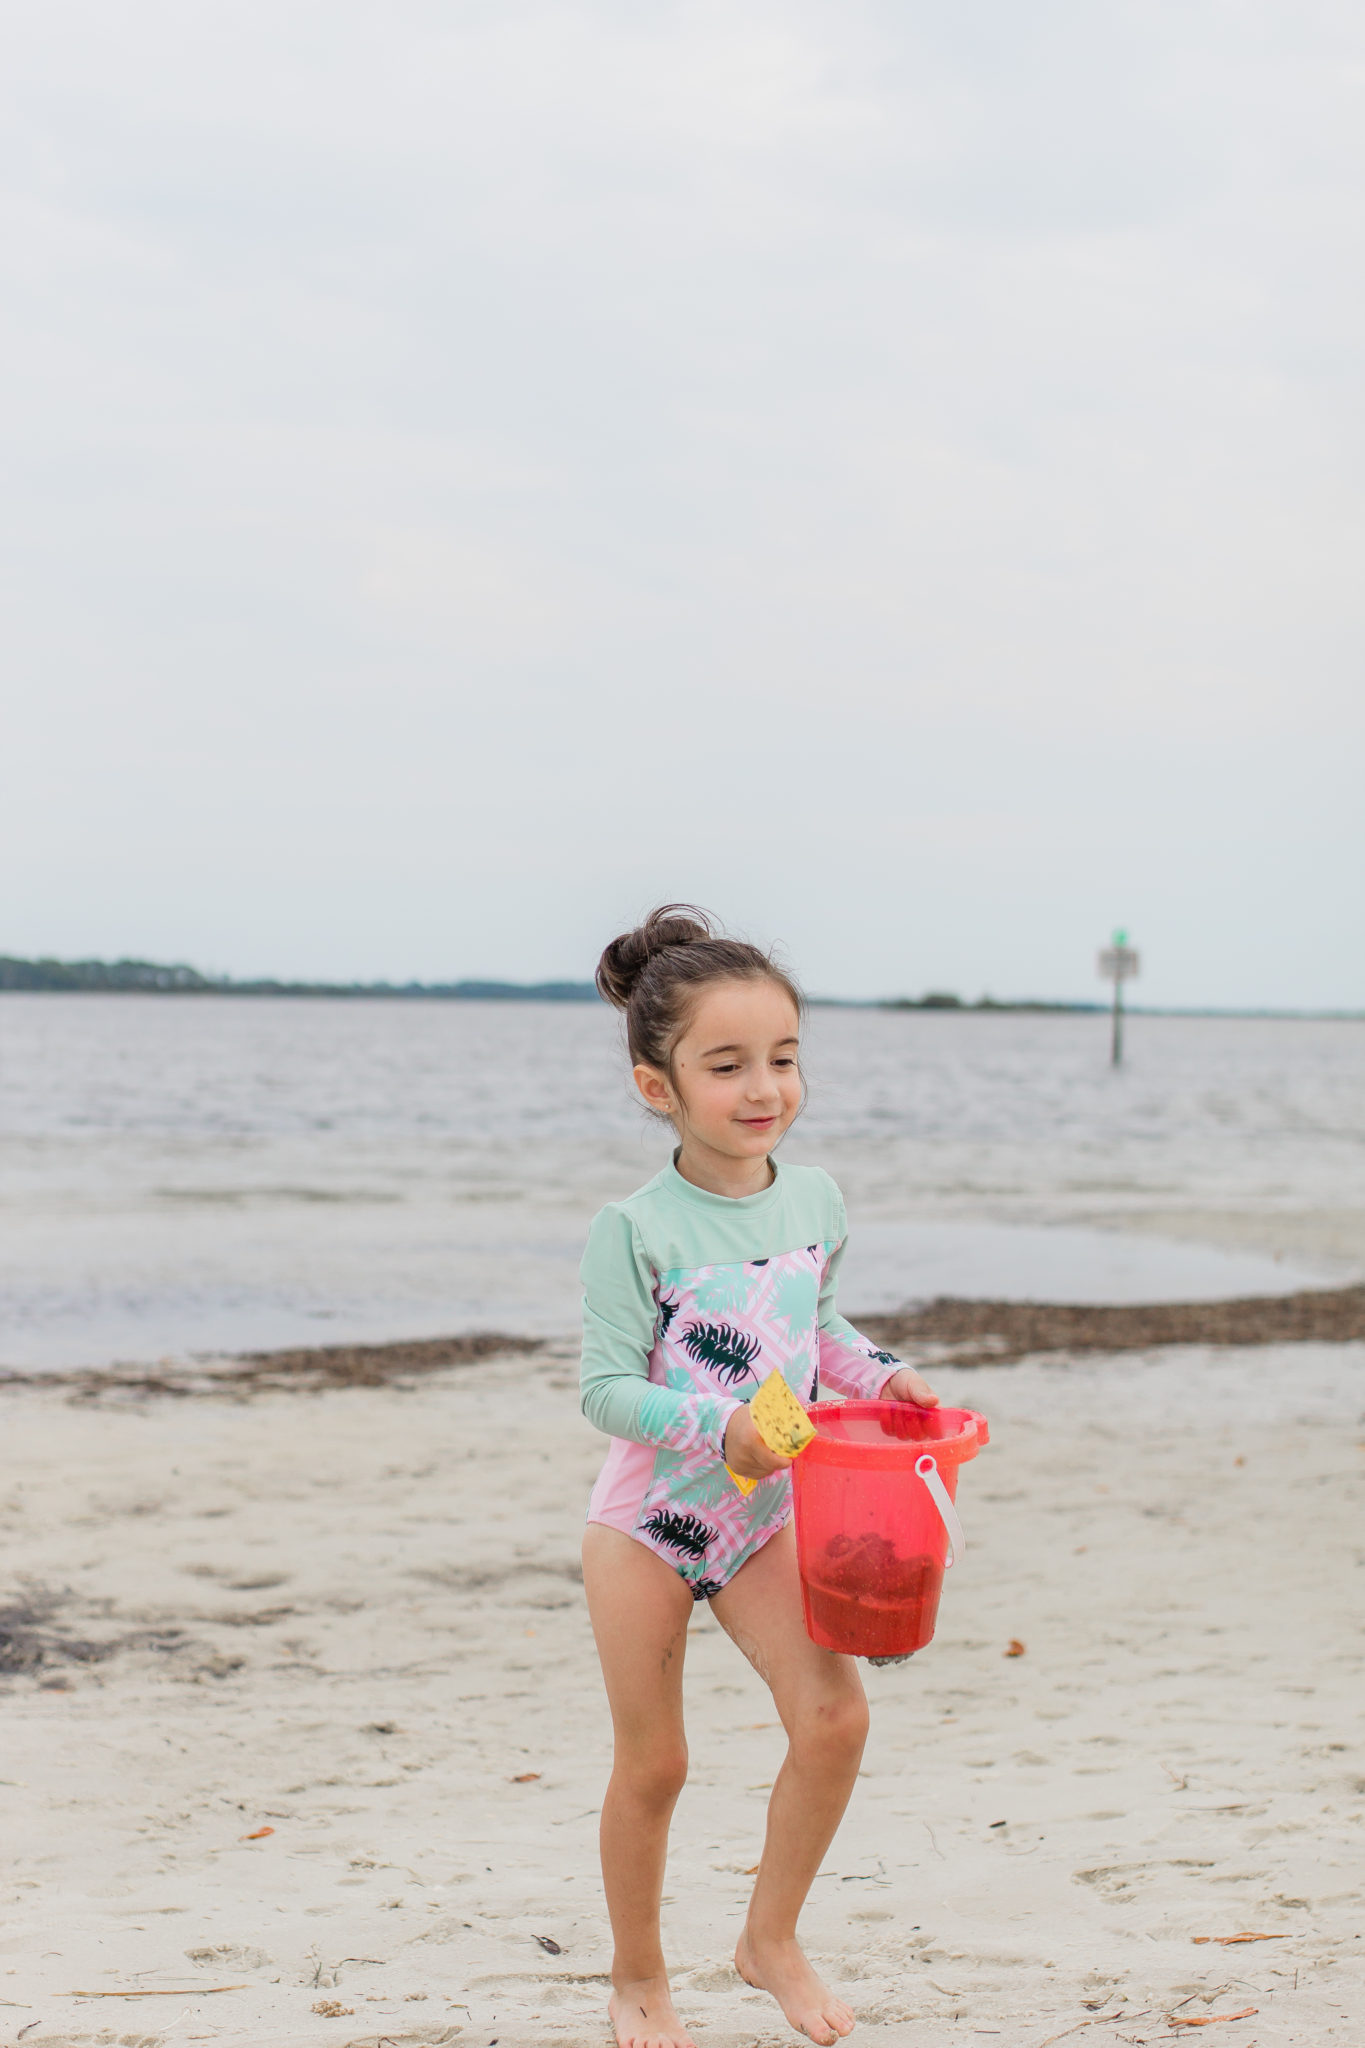 simple beach packing list for toddlers, surviving a day at the beach with kids, beach hacks for kids, beach tips for families, spending a day at the beach with babies and kids